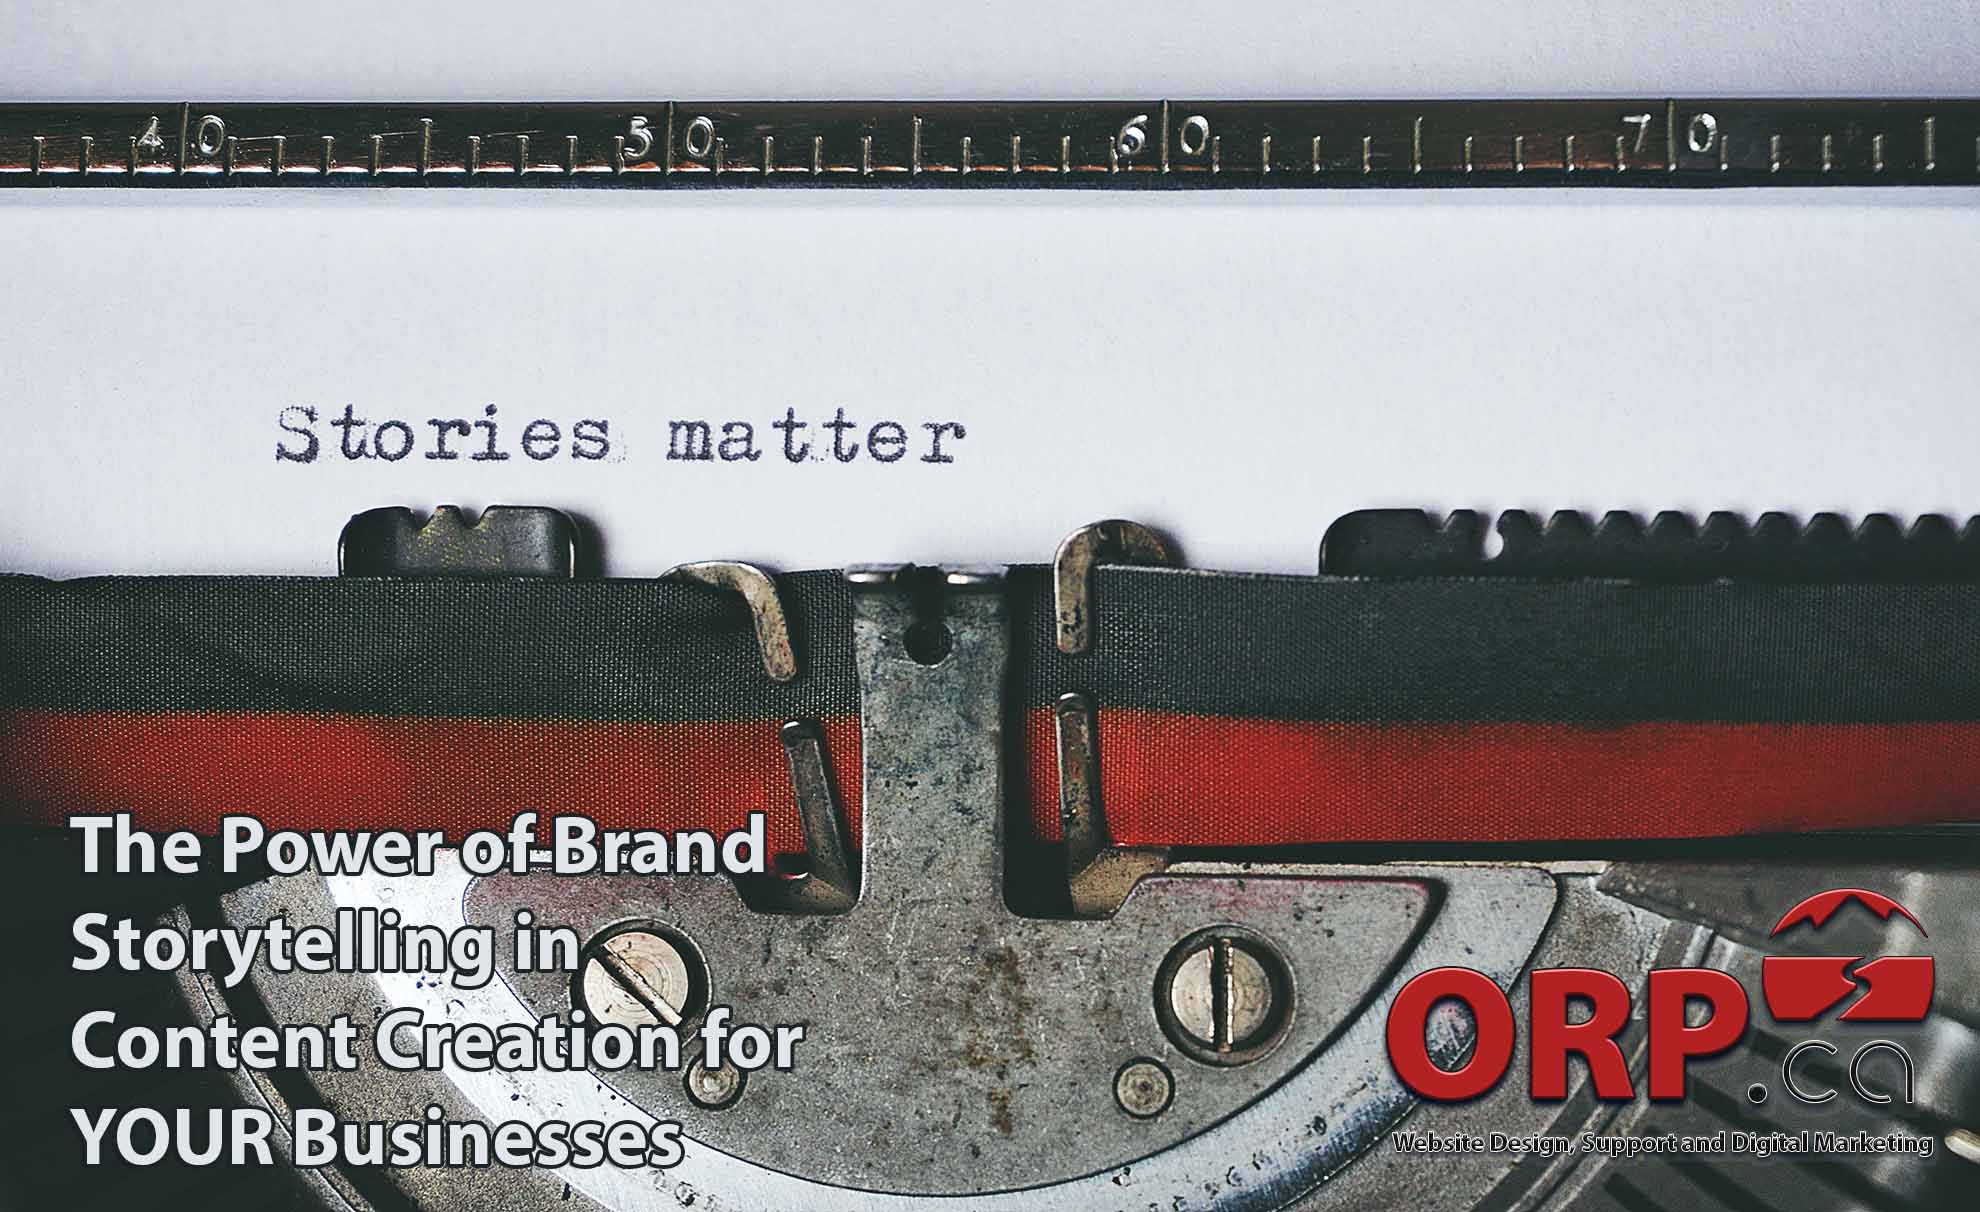 The Power of Brand Storytelling in Content Creation for YOUR Businesses - A Blog Article From The Team At ORP.ca - Providing Website Design and Development, Graphic Design and Marketing Services To Small and Medium Sized Businesses Since 2003.